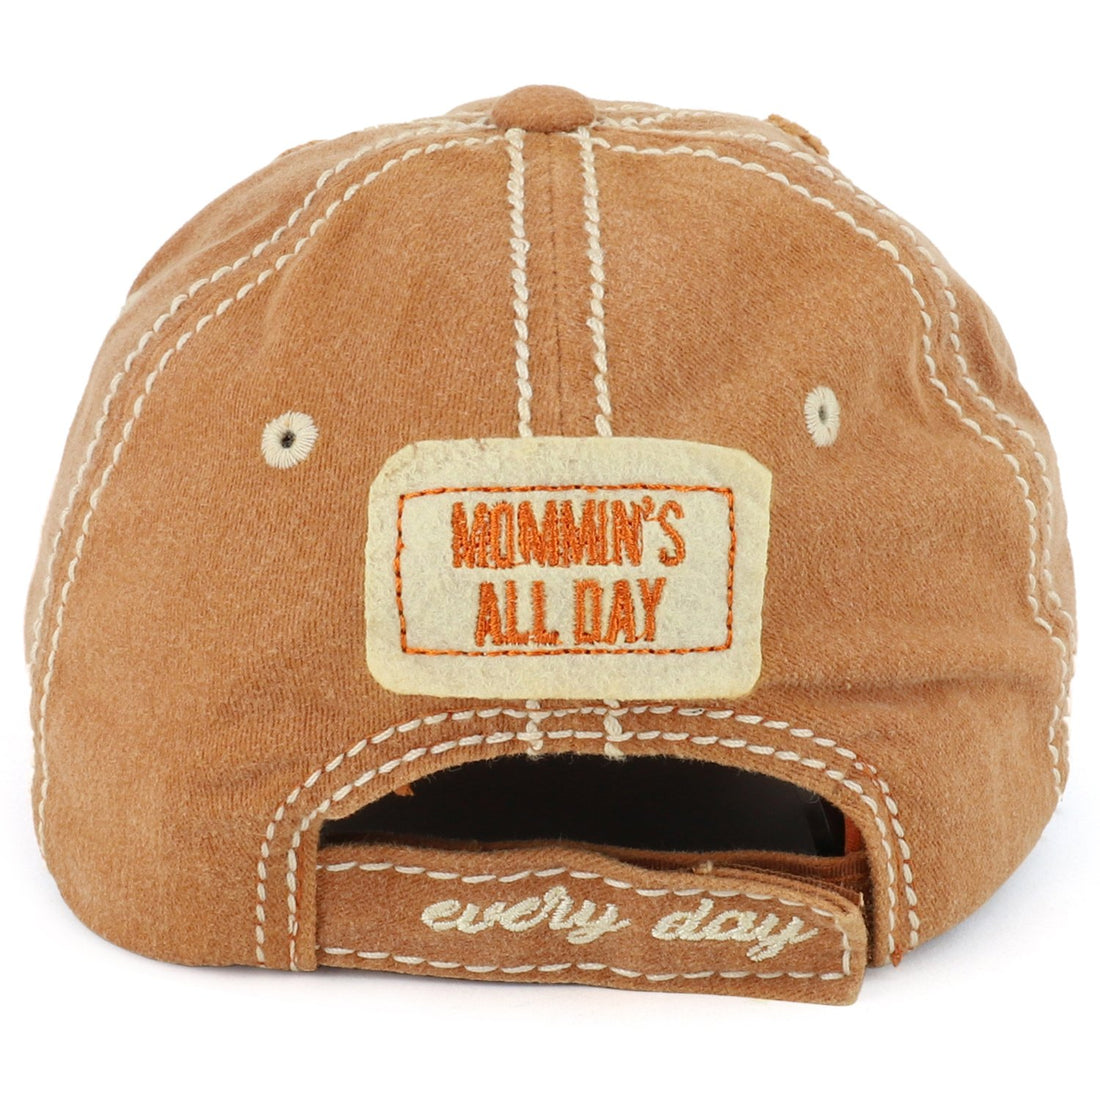 Trendy Apparel Shop Mommin's All Day Everyday Embroidered Vintage Frayed Cap